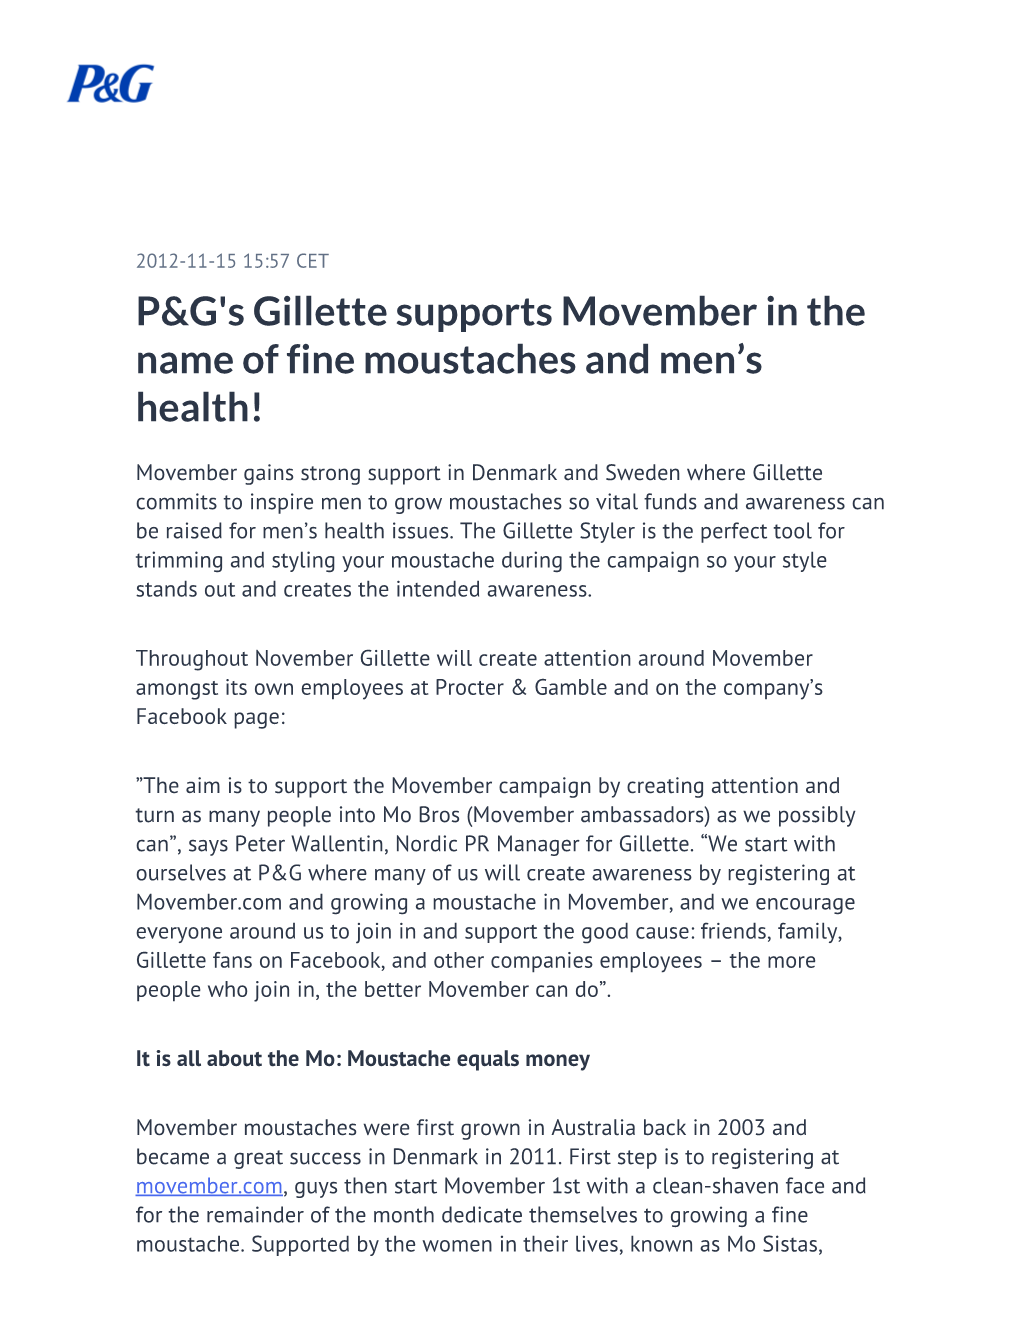 P&G's Gillette Supports Movember in the Name of Fine